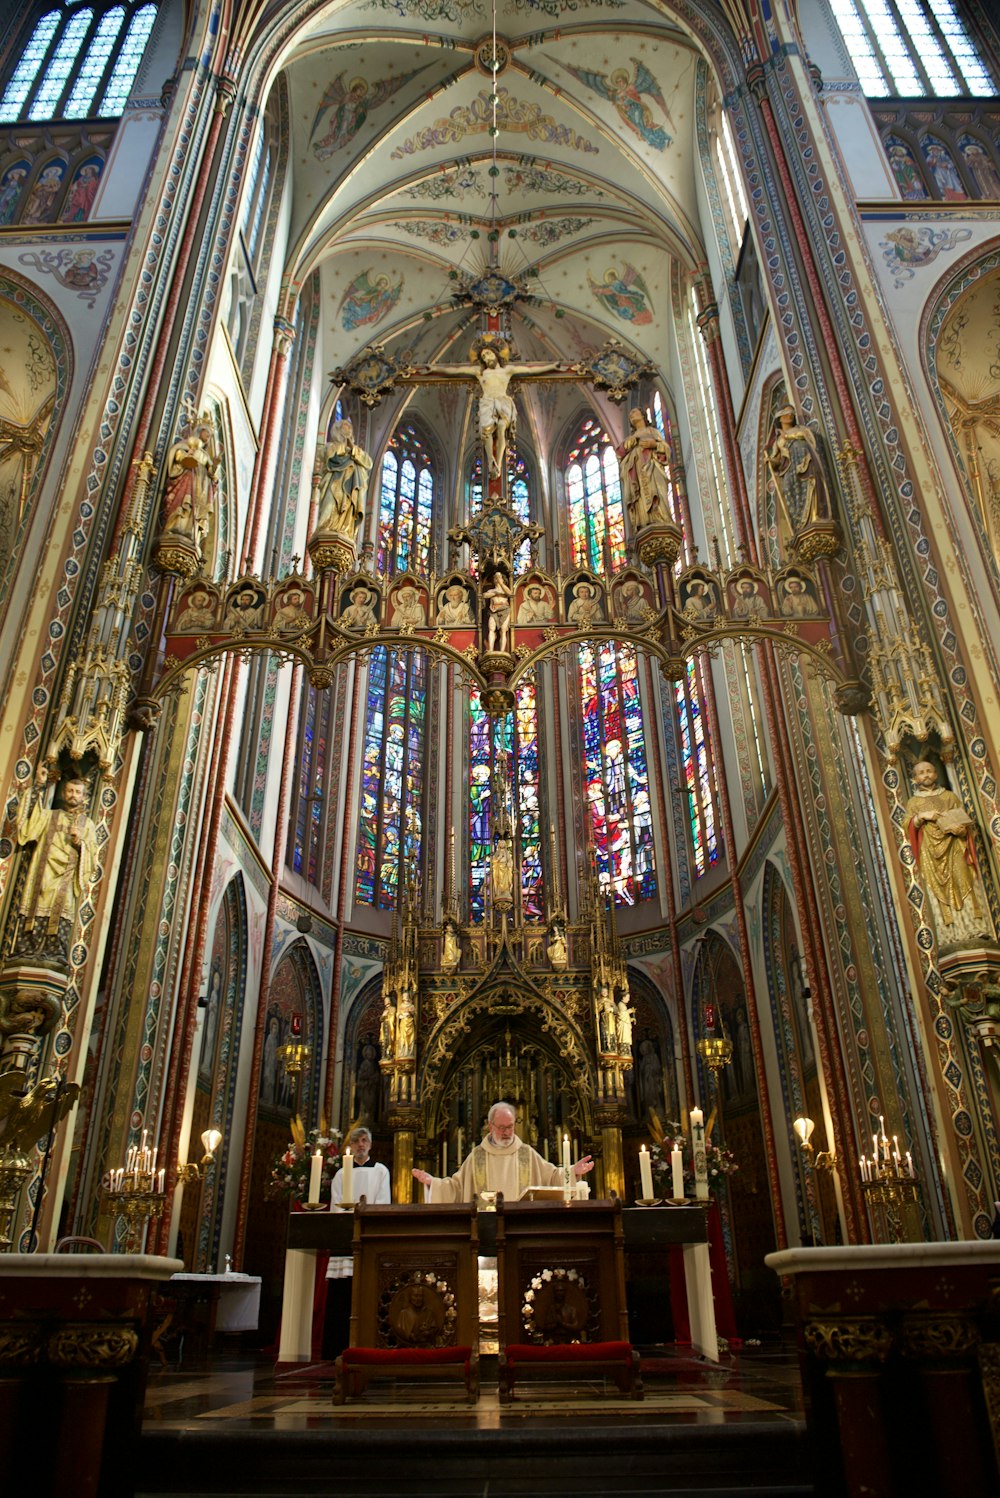 a large ornate religious building with stained glass windows